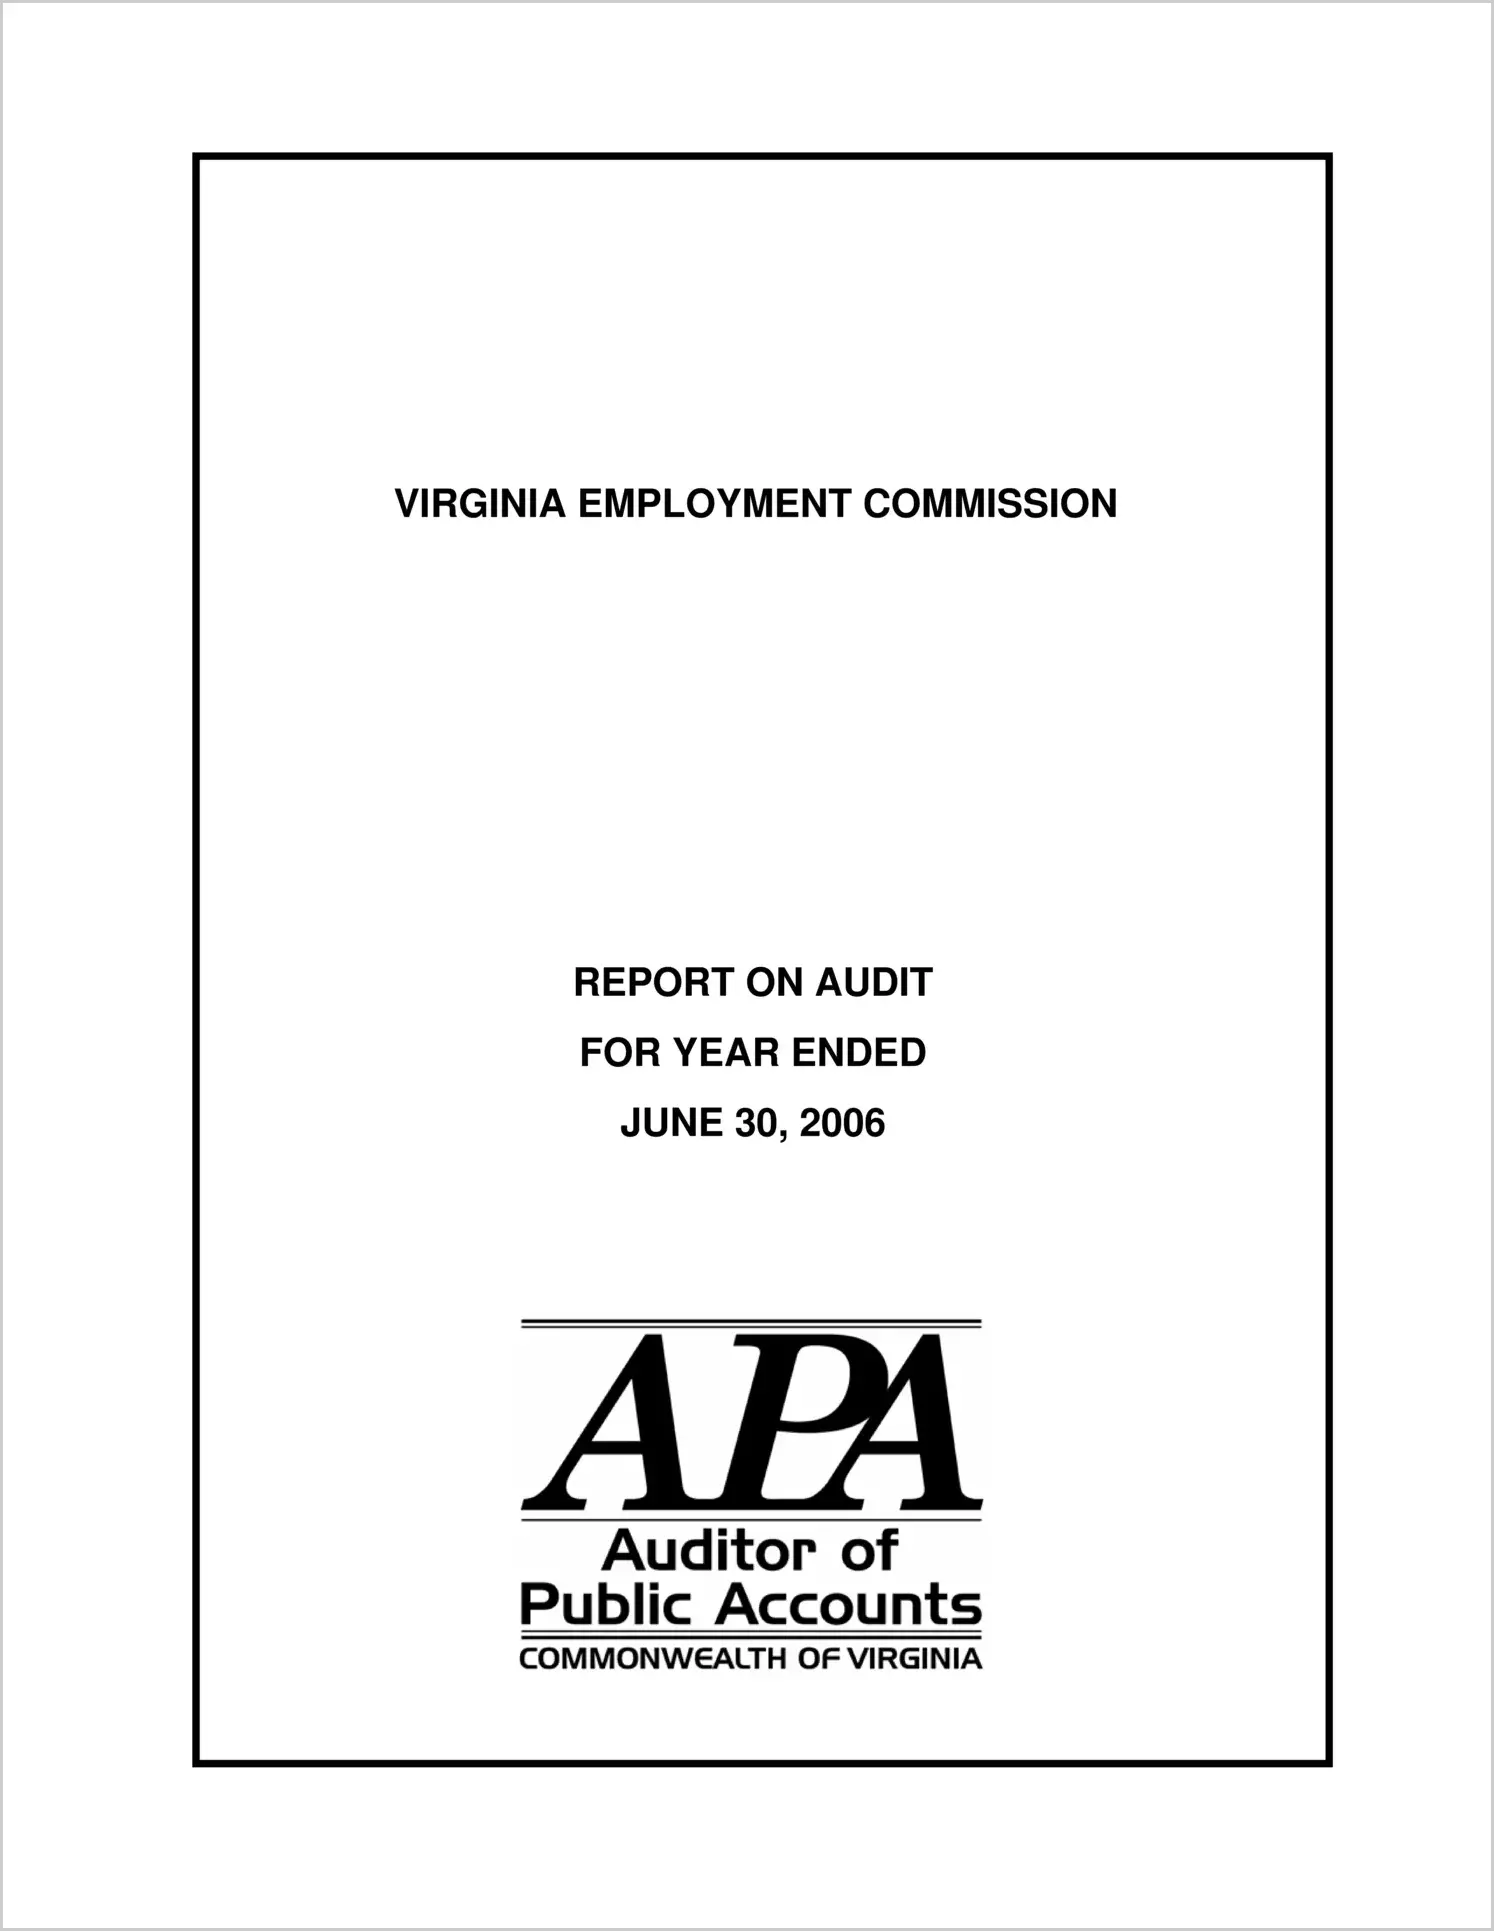 Virginia Employment Commission for the year ended June 30, 2006